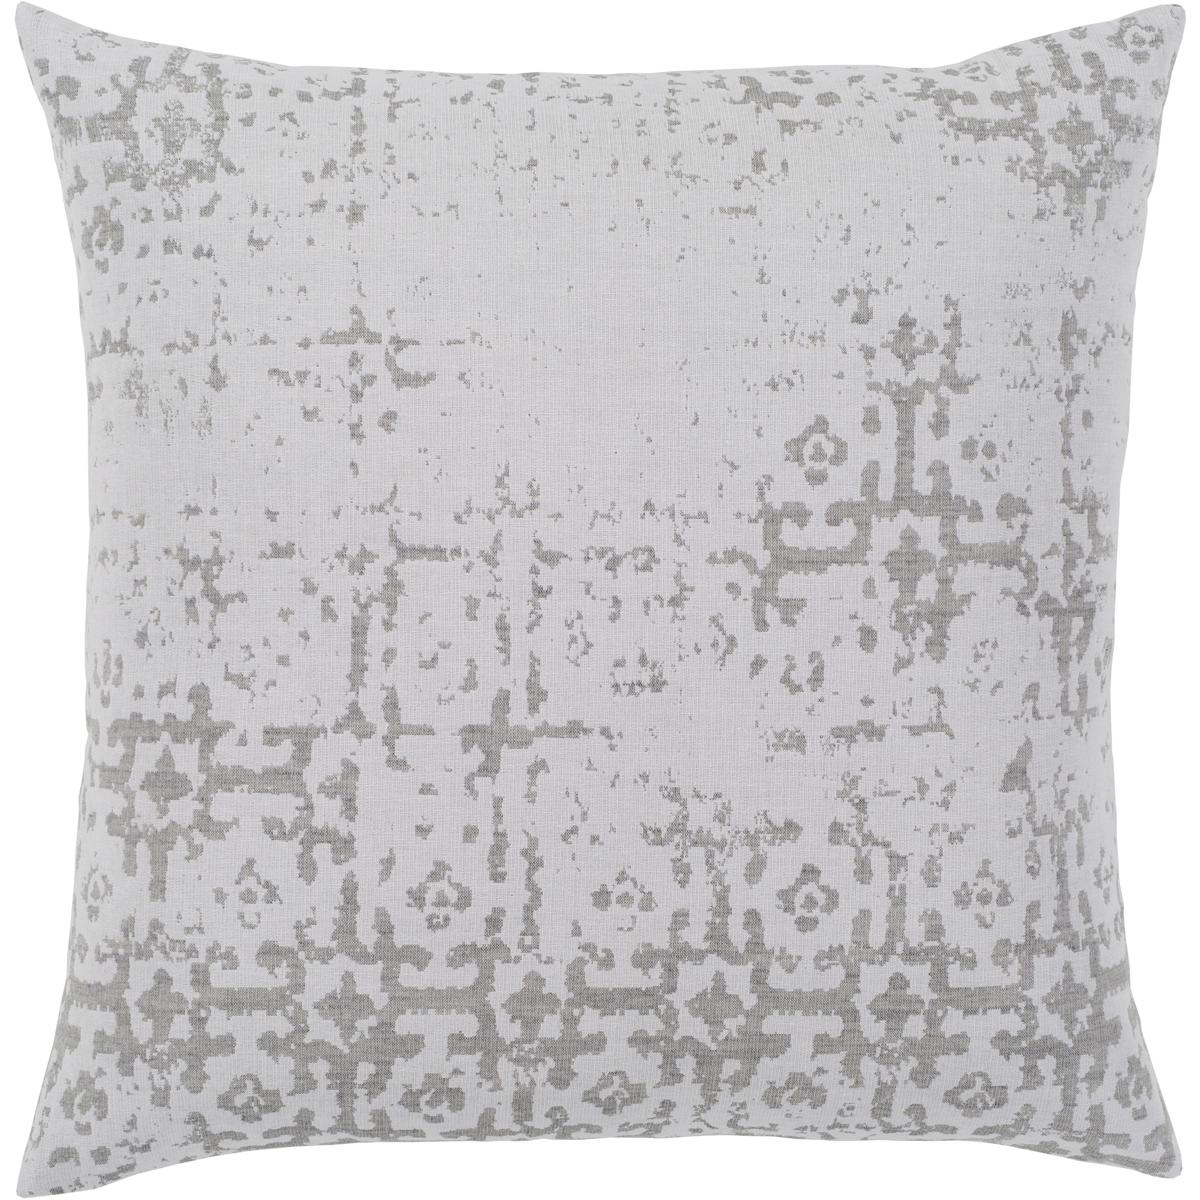 Surya Asr001 1818d Abstraction 18 X 18 Inch Light Gray Pillow Kit Square Ebay